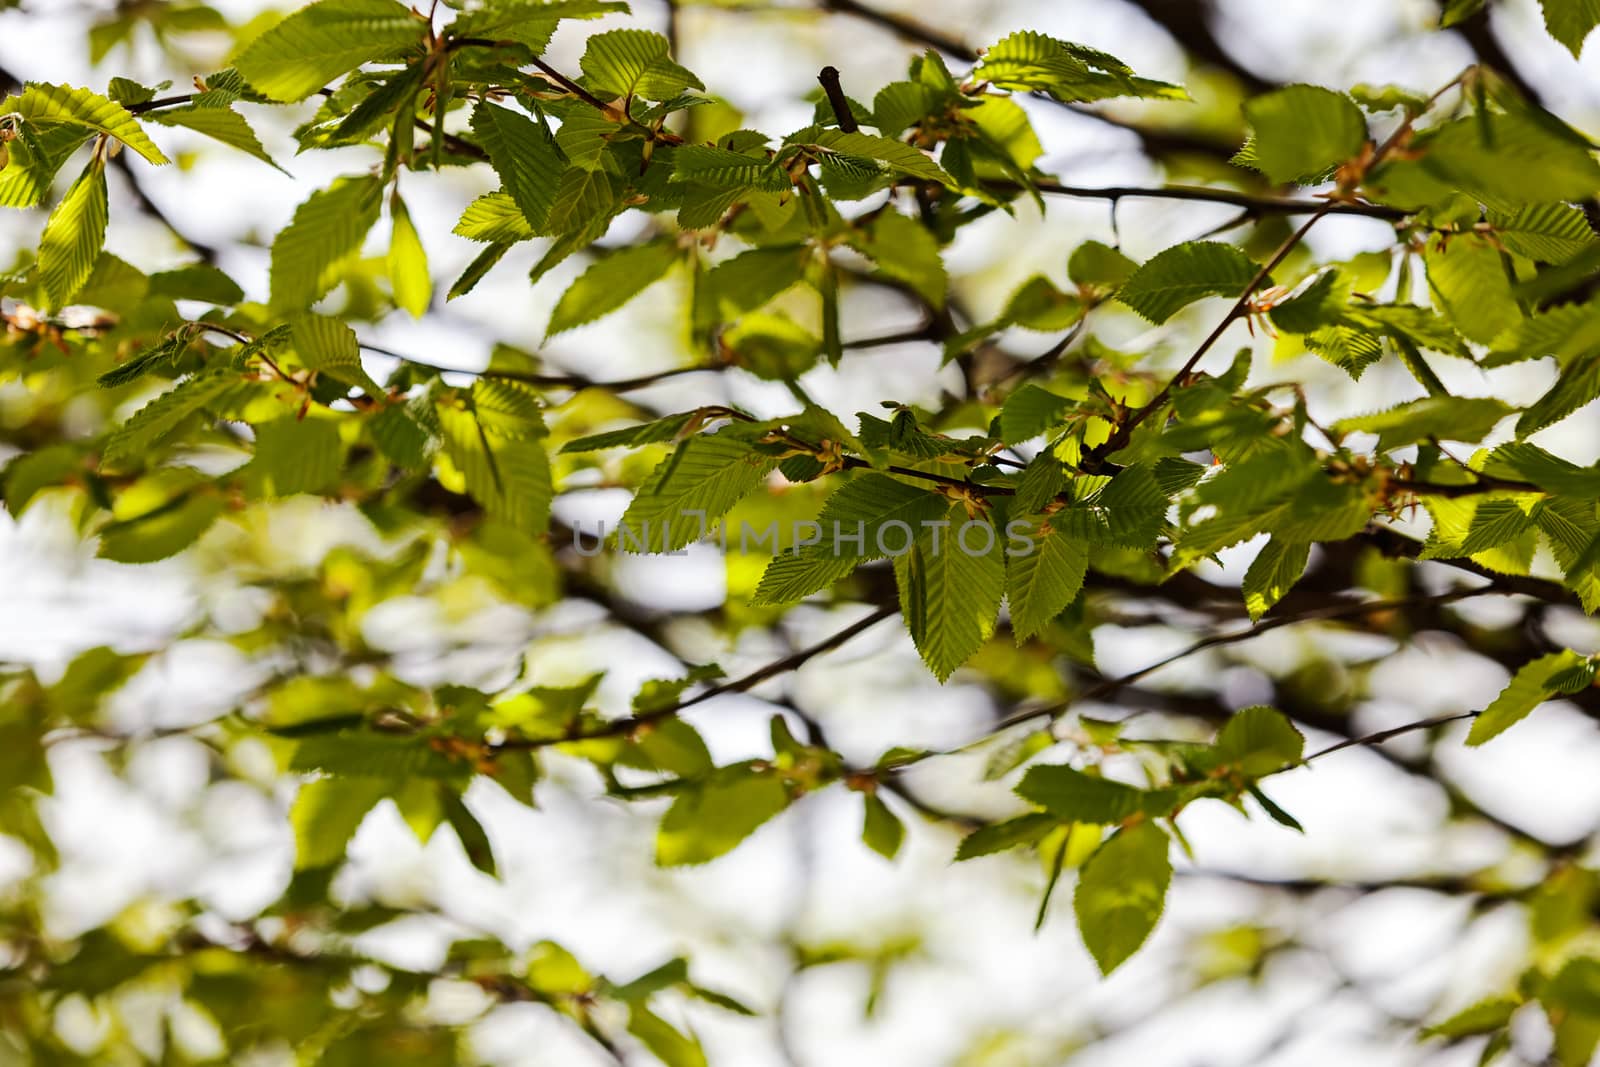 leafy branch in spring in nature, note shallow depth of field